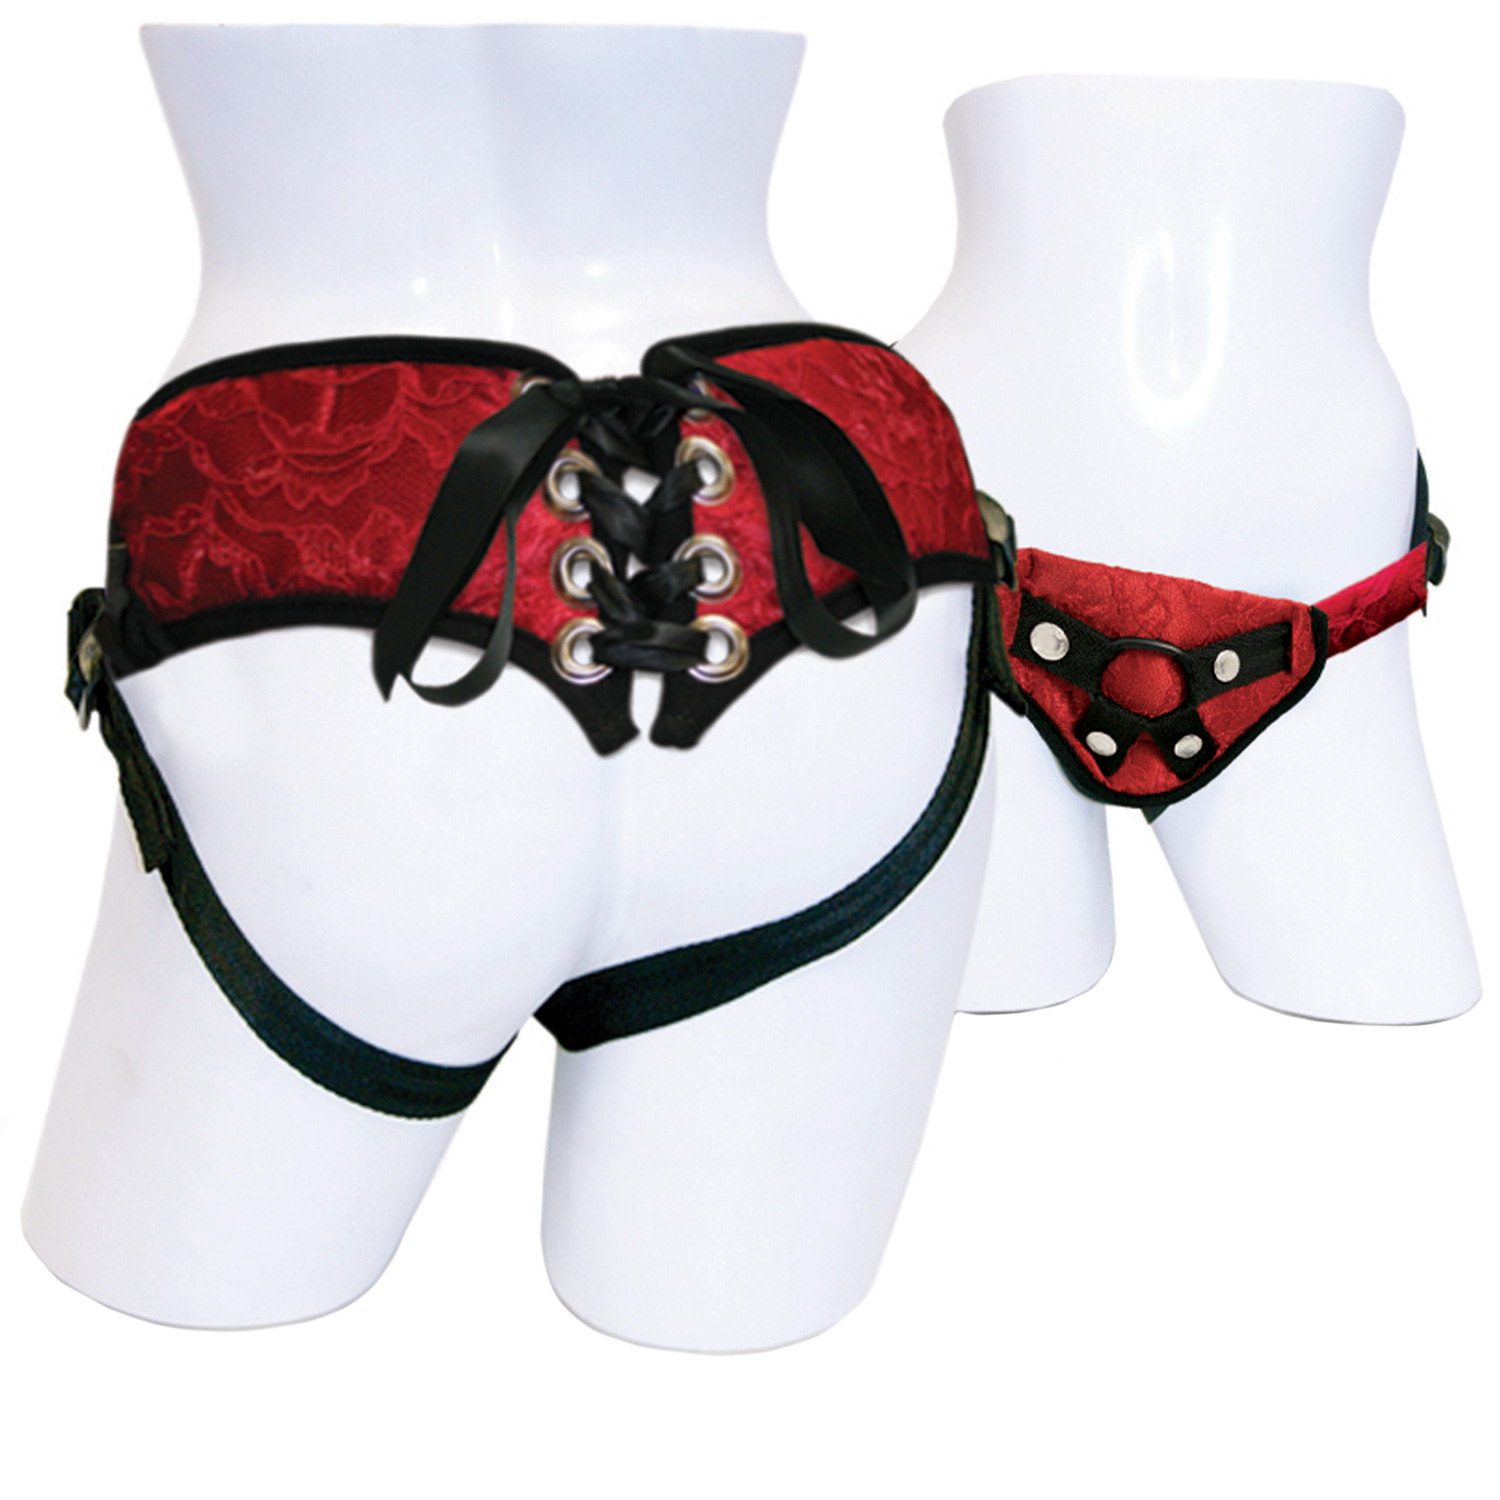 Sportsheets Red Lace Korset Strap-On Harness - Red thumbnail